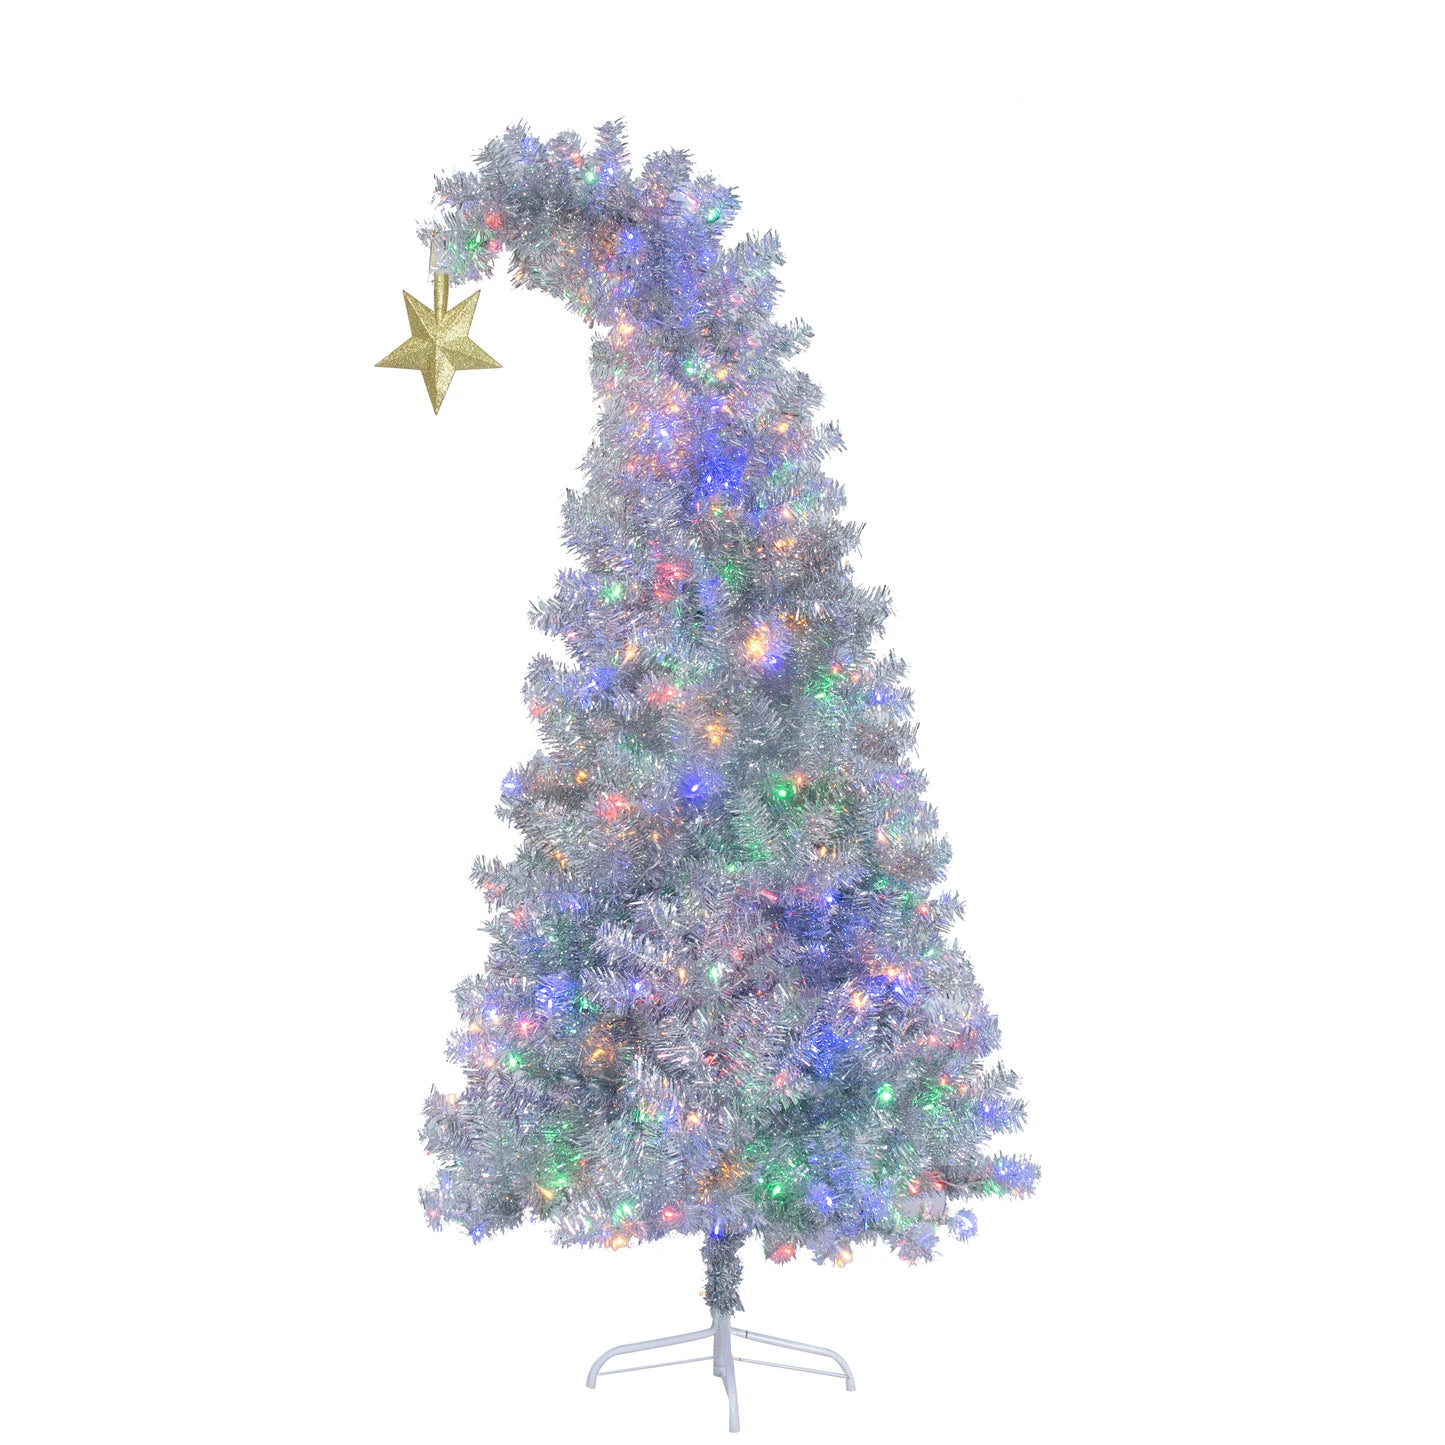 Gorgeous 6 FT Fir Bent Top Christmas Tree With Colorful LED Lights and Golden Star